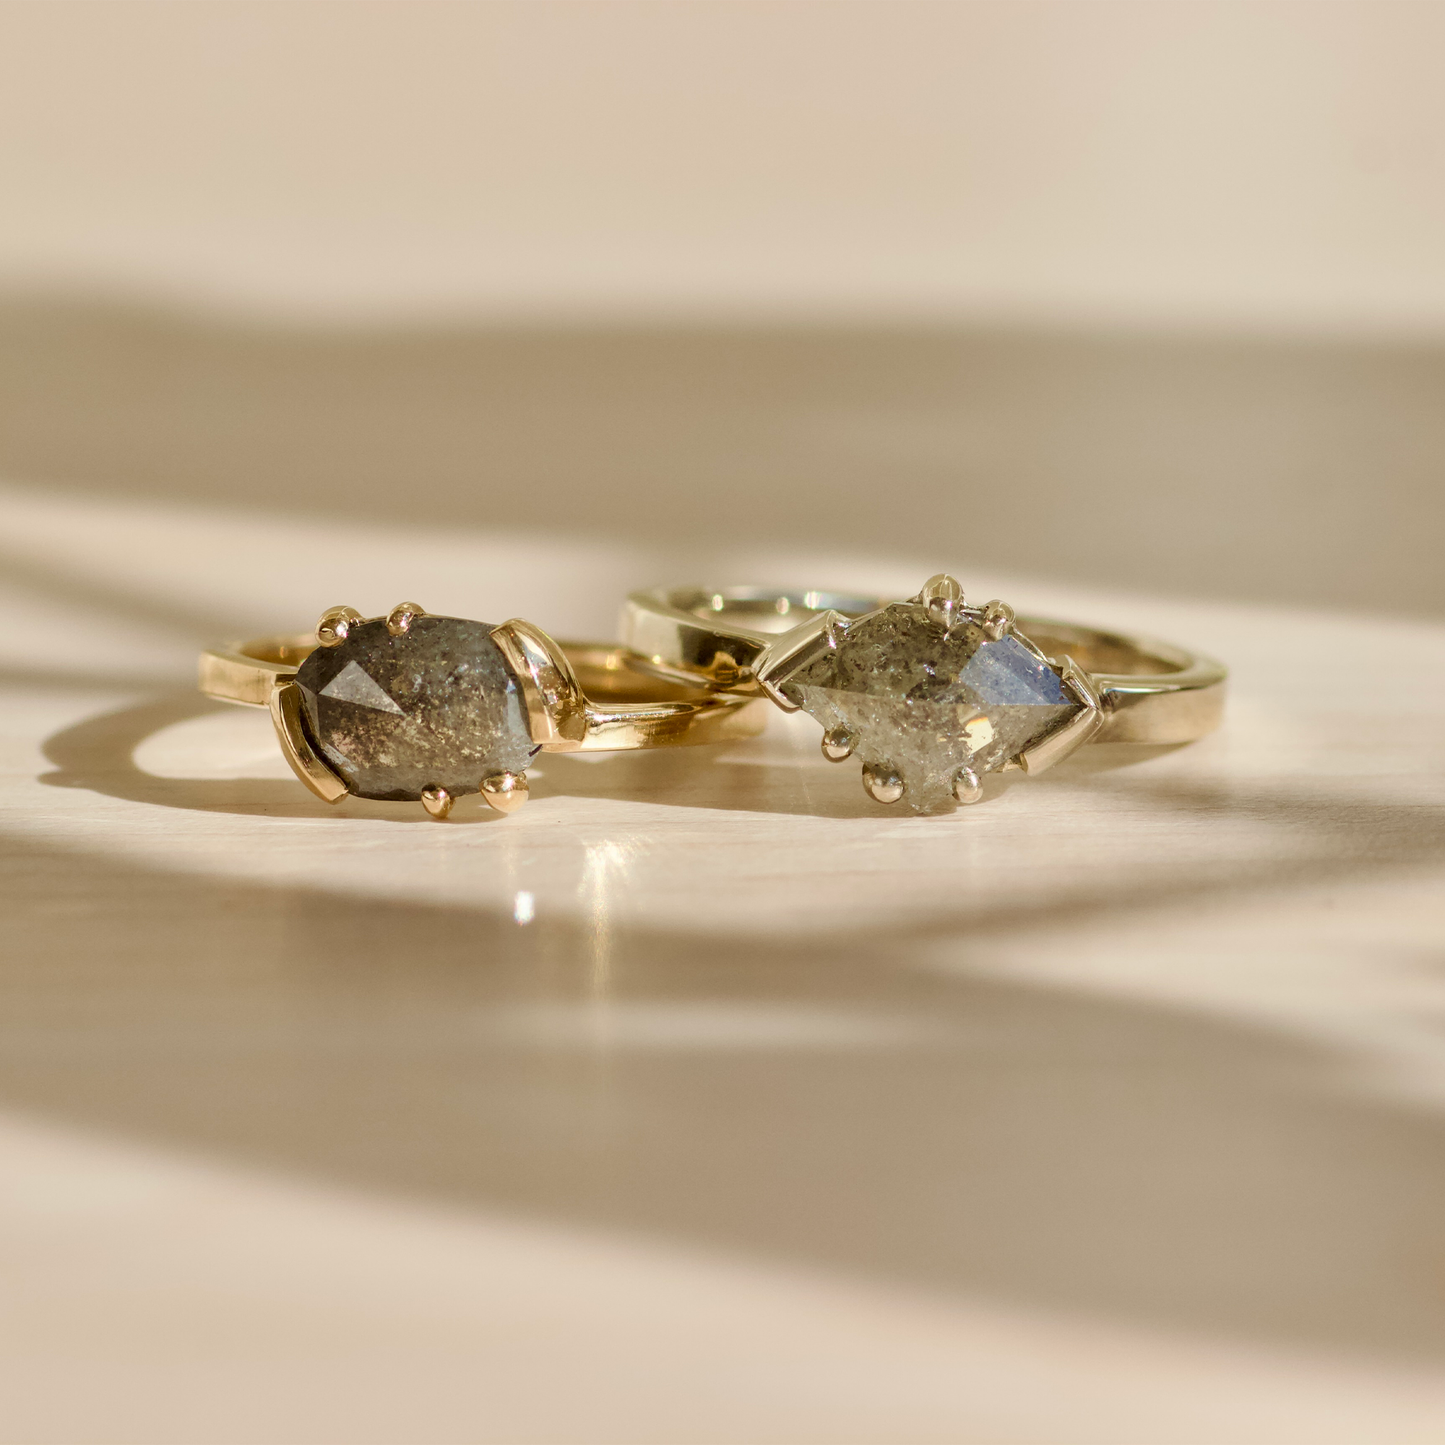 Load image into Gallery viewer, Miro Ring / Rose Cut Oval S + P Diamond 1.02ct - Goldpoint Studio - Greenpoint, Brooklyn - Fine Jewelry
